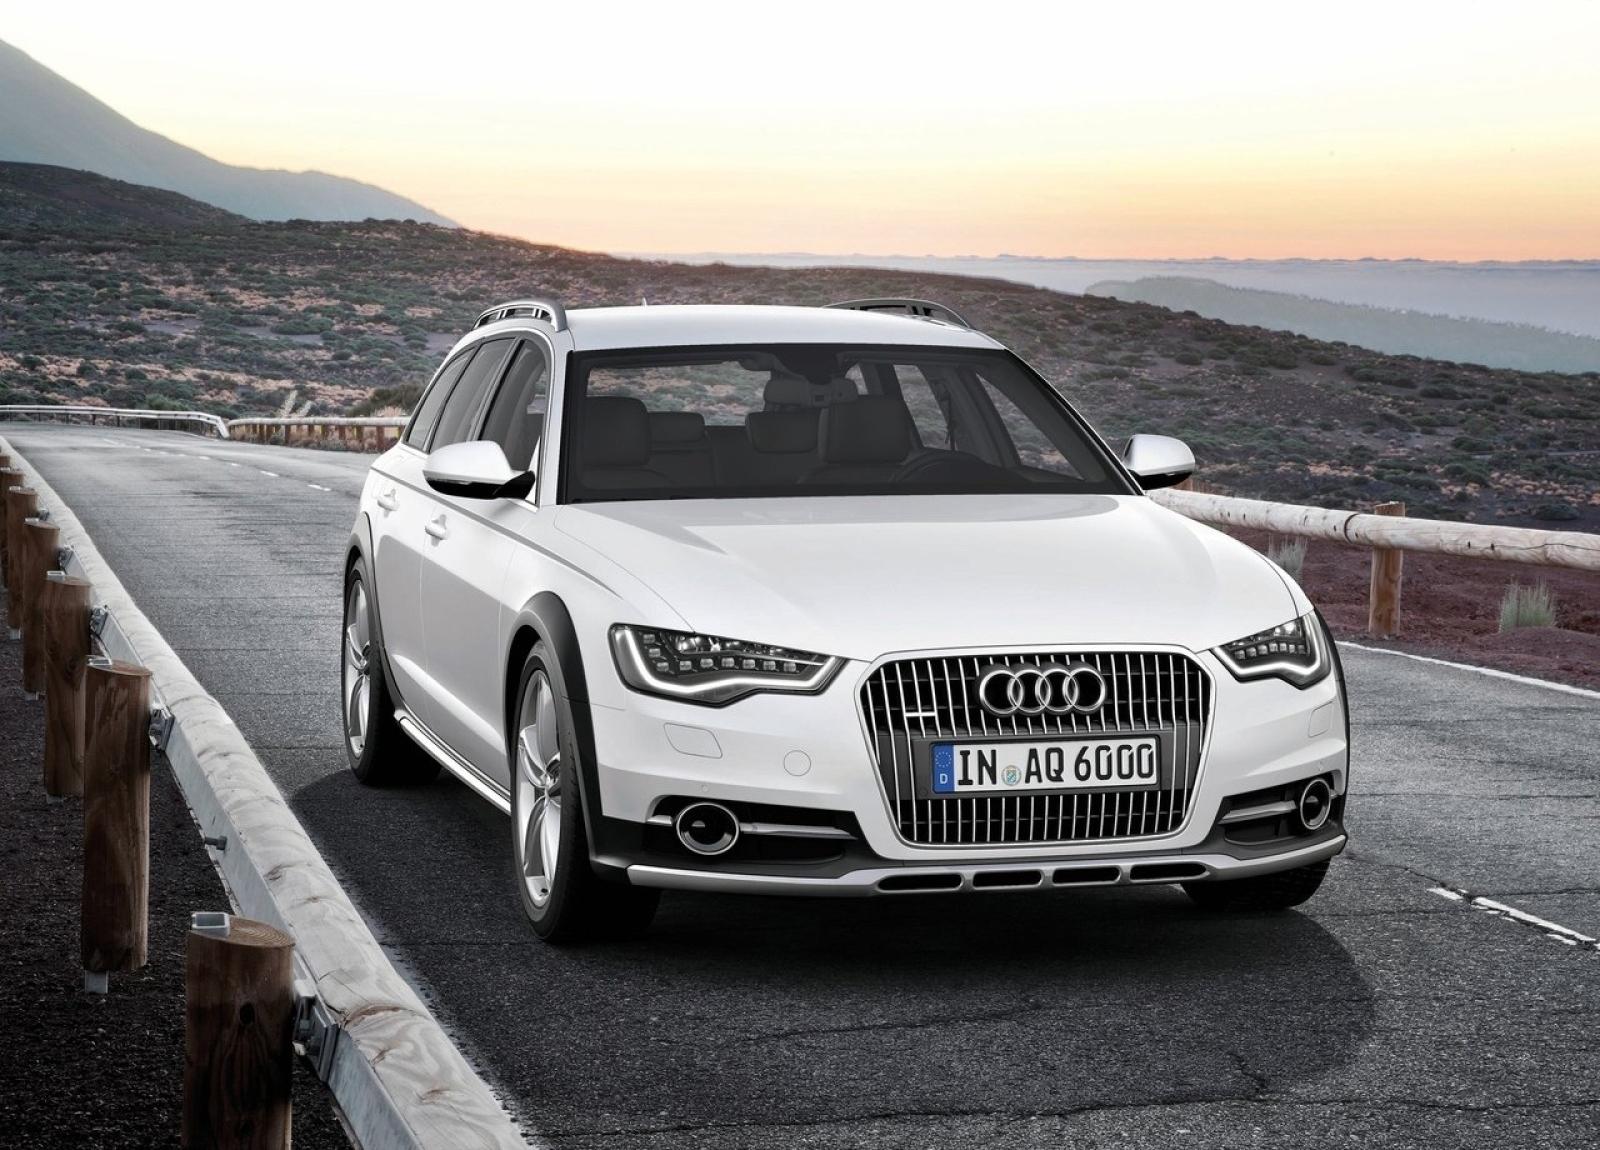 Audi A6 Allroad 3.0 TDI Technical Specifications. Technical Data